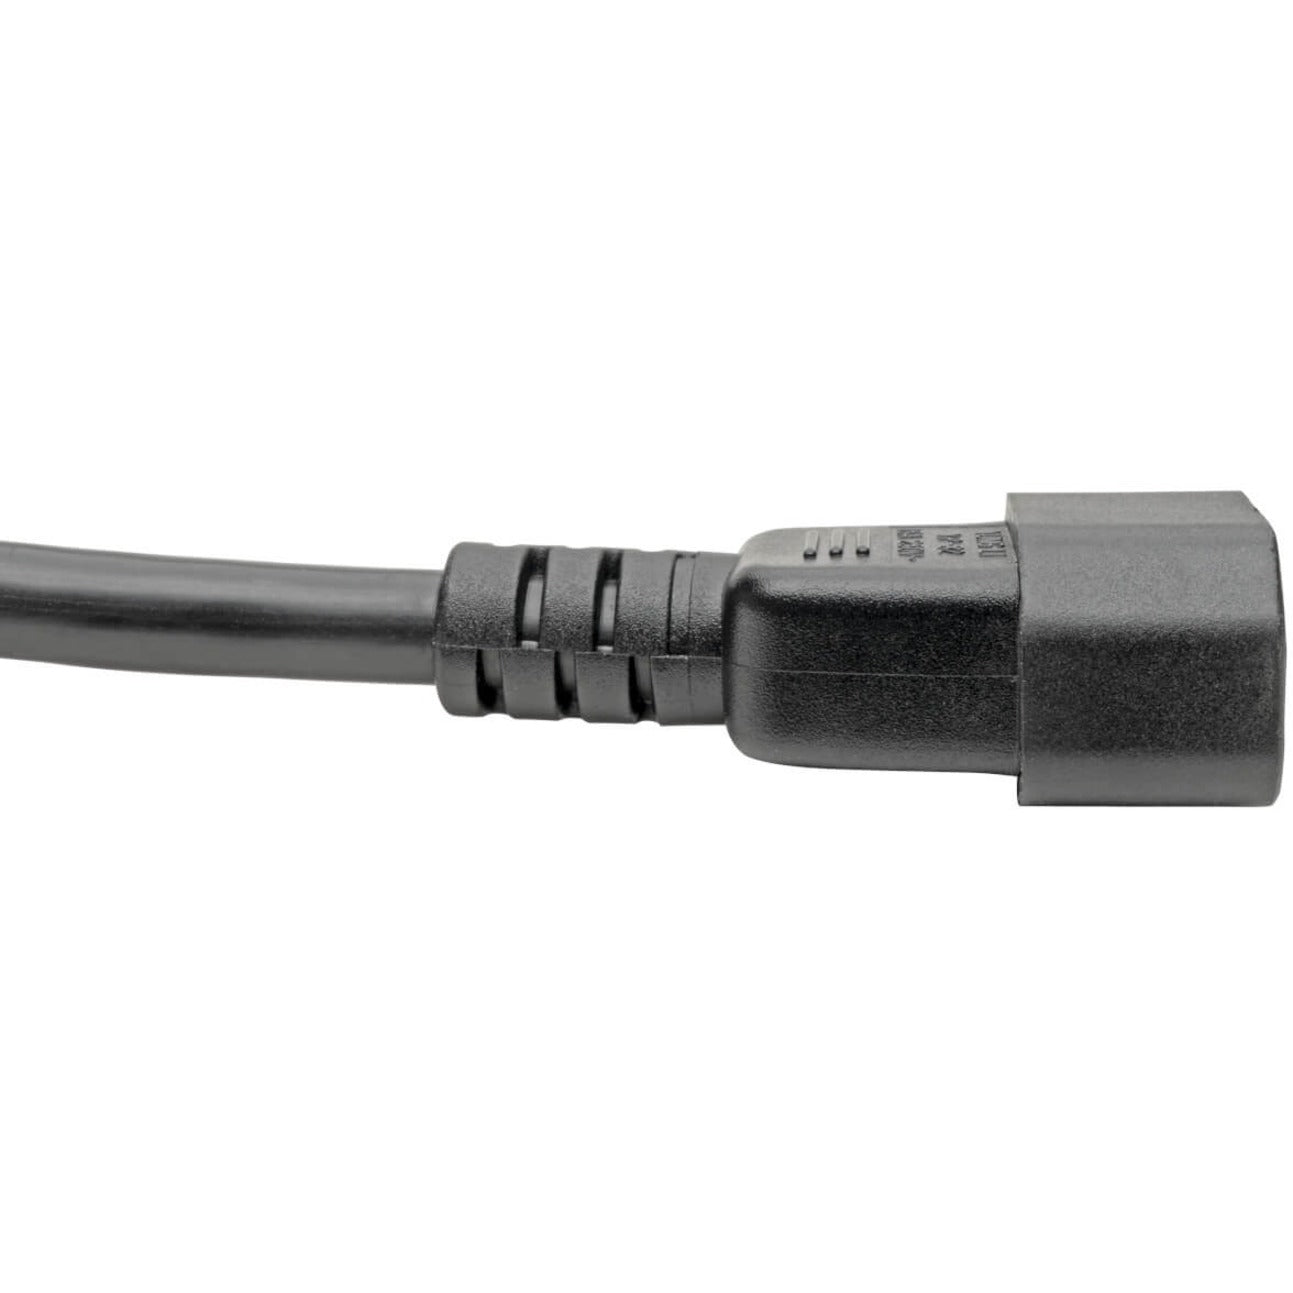 Tripp Lite P047-006 Power Interconnect Cable, 6 ft, 14 AWG, 15A, 250V AC